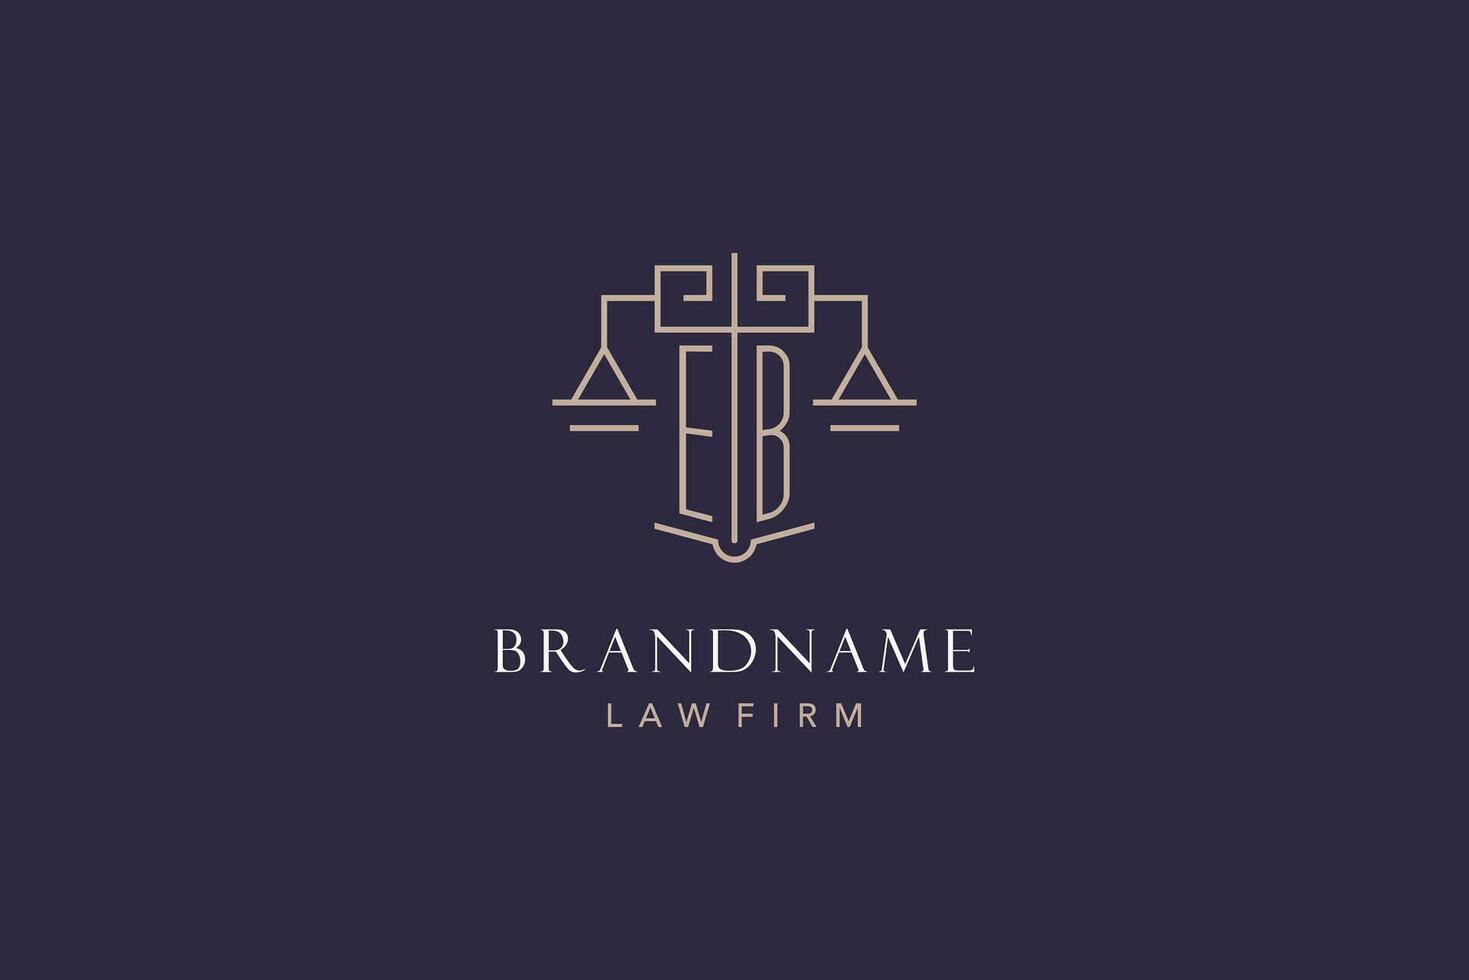 Initial letter EB logo with scale of justice logo design, luxury legal logo geometric style vector